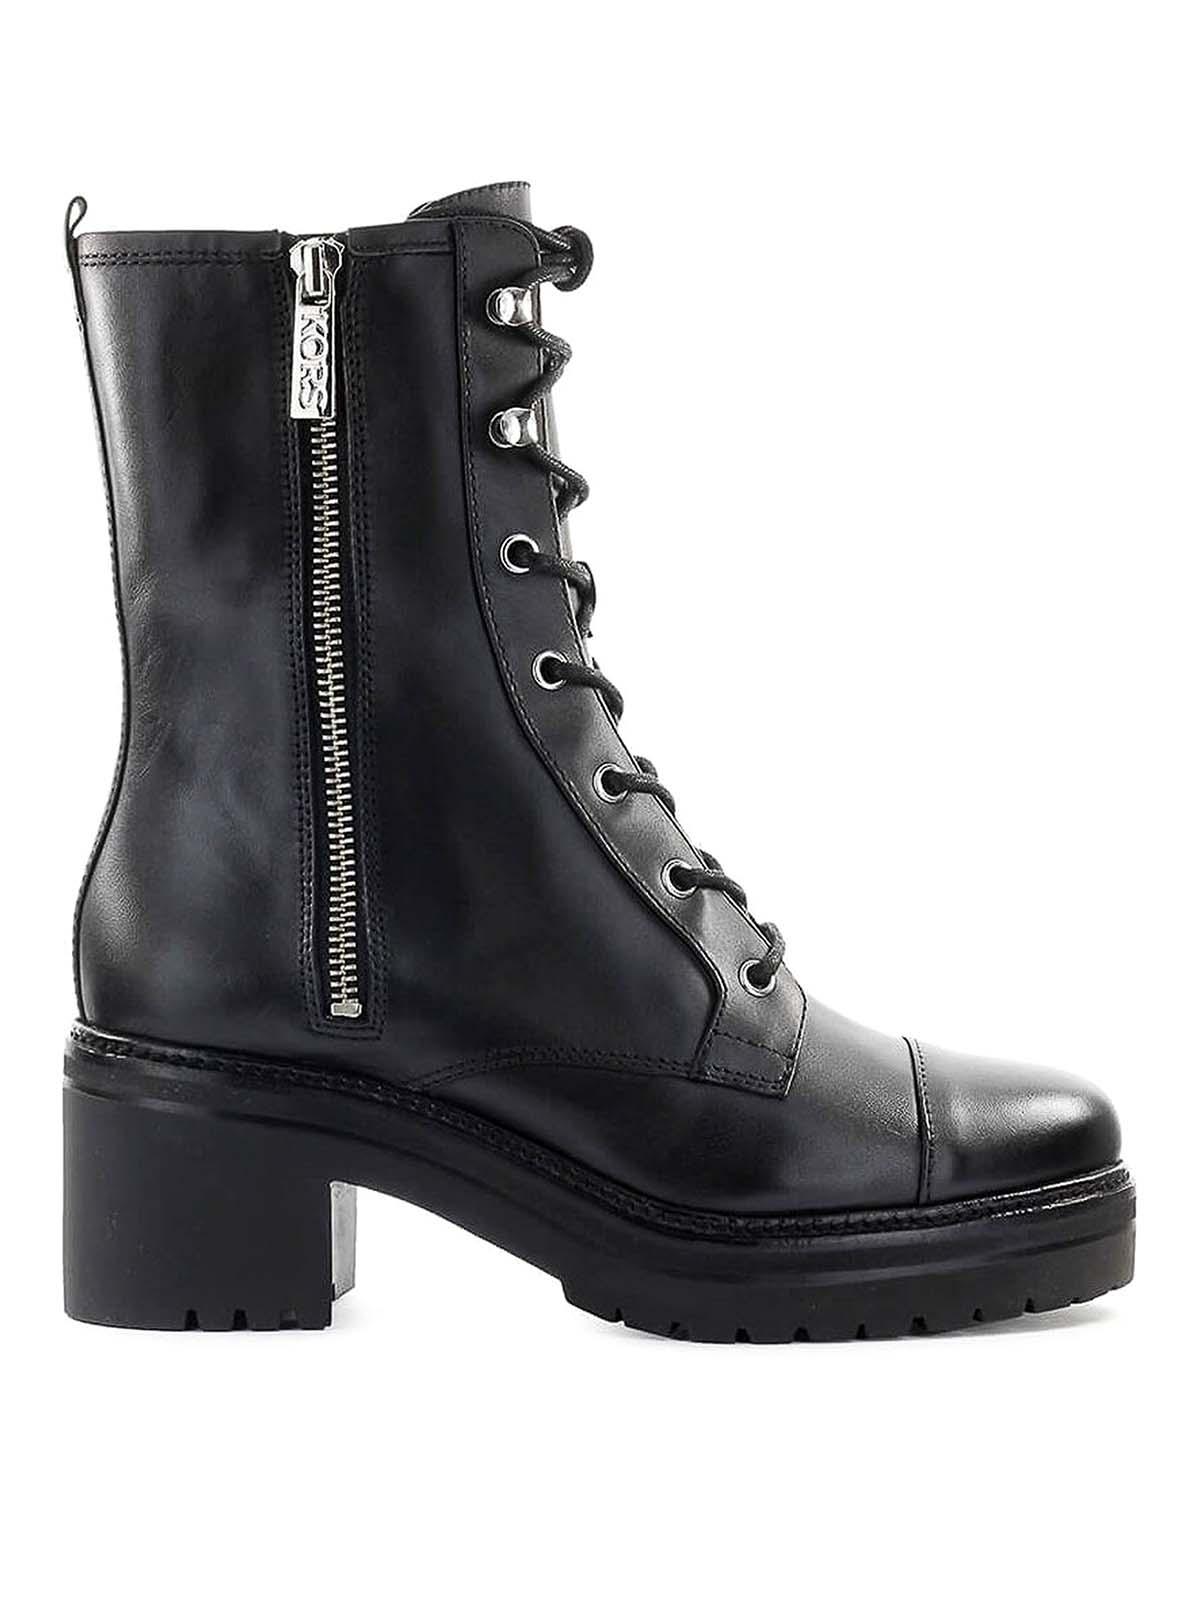 Michael Kors - Anaka leather combat boots - ankle boots - 40F9ANME5L001